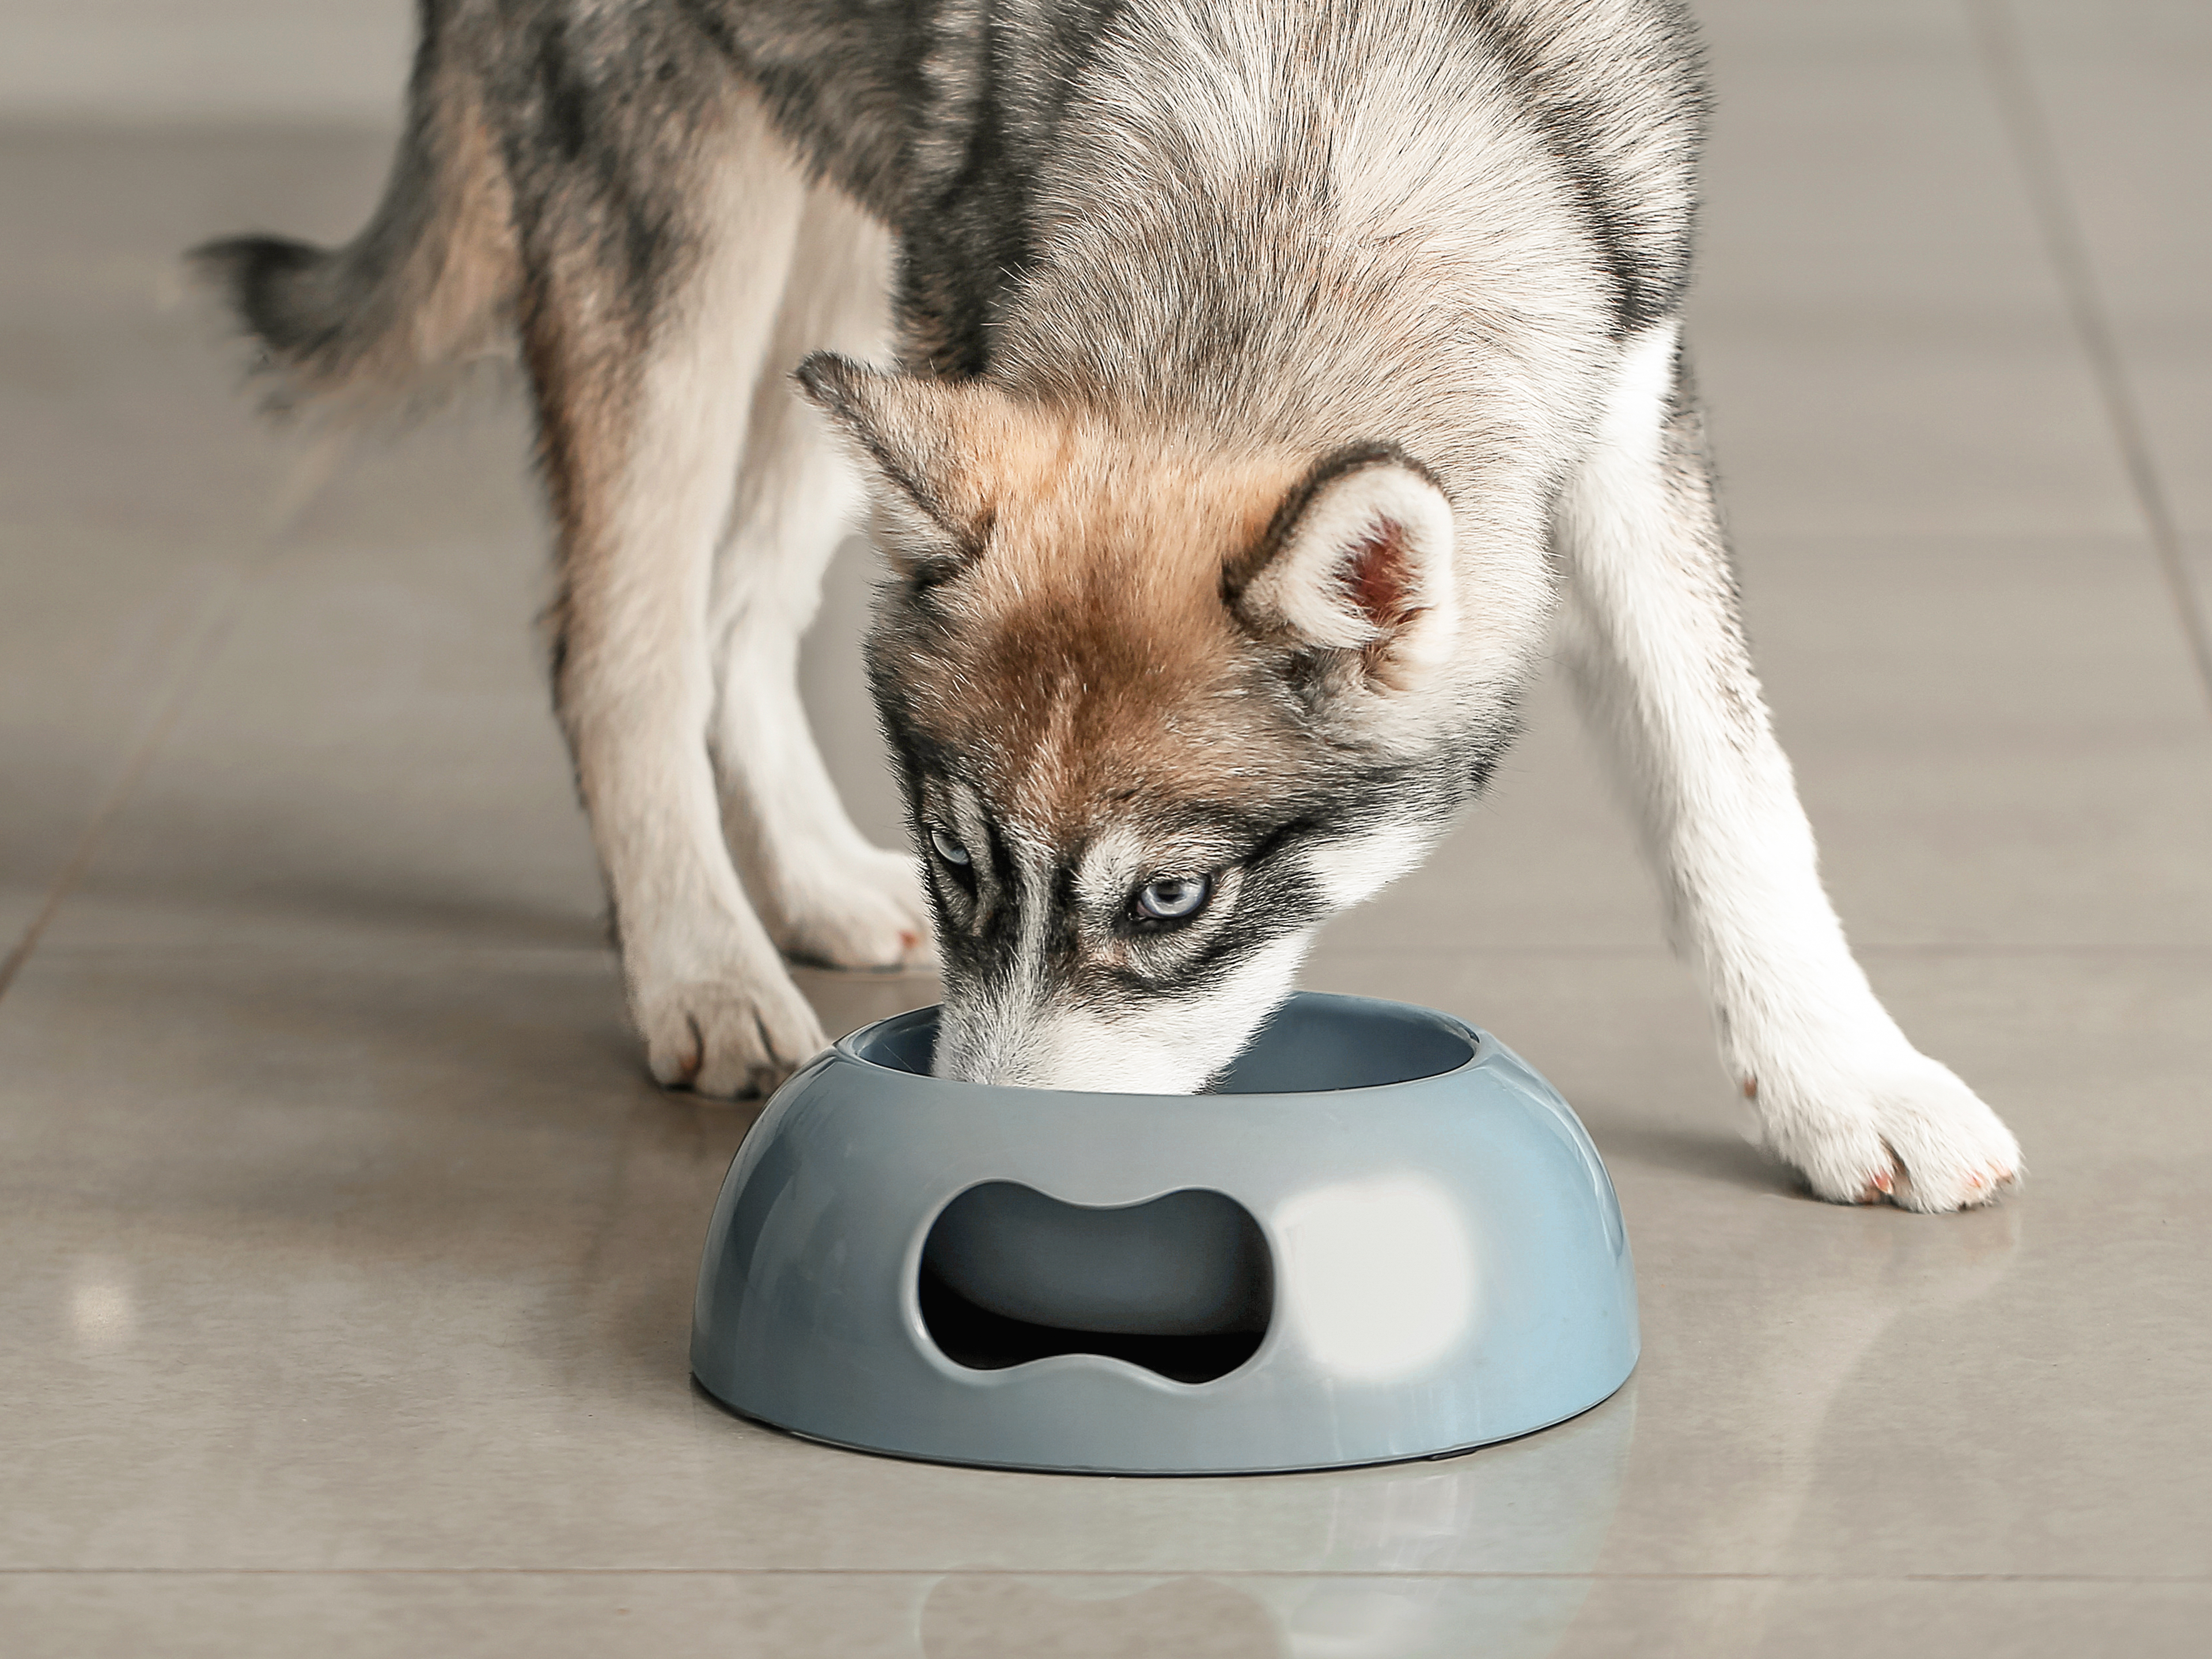 Husky puppy standing in a kitchen eating from a bowl